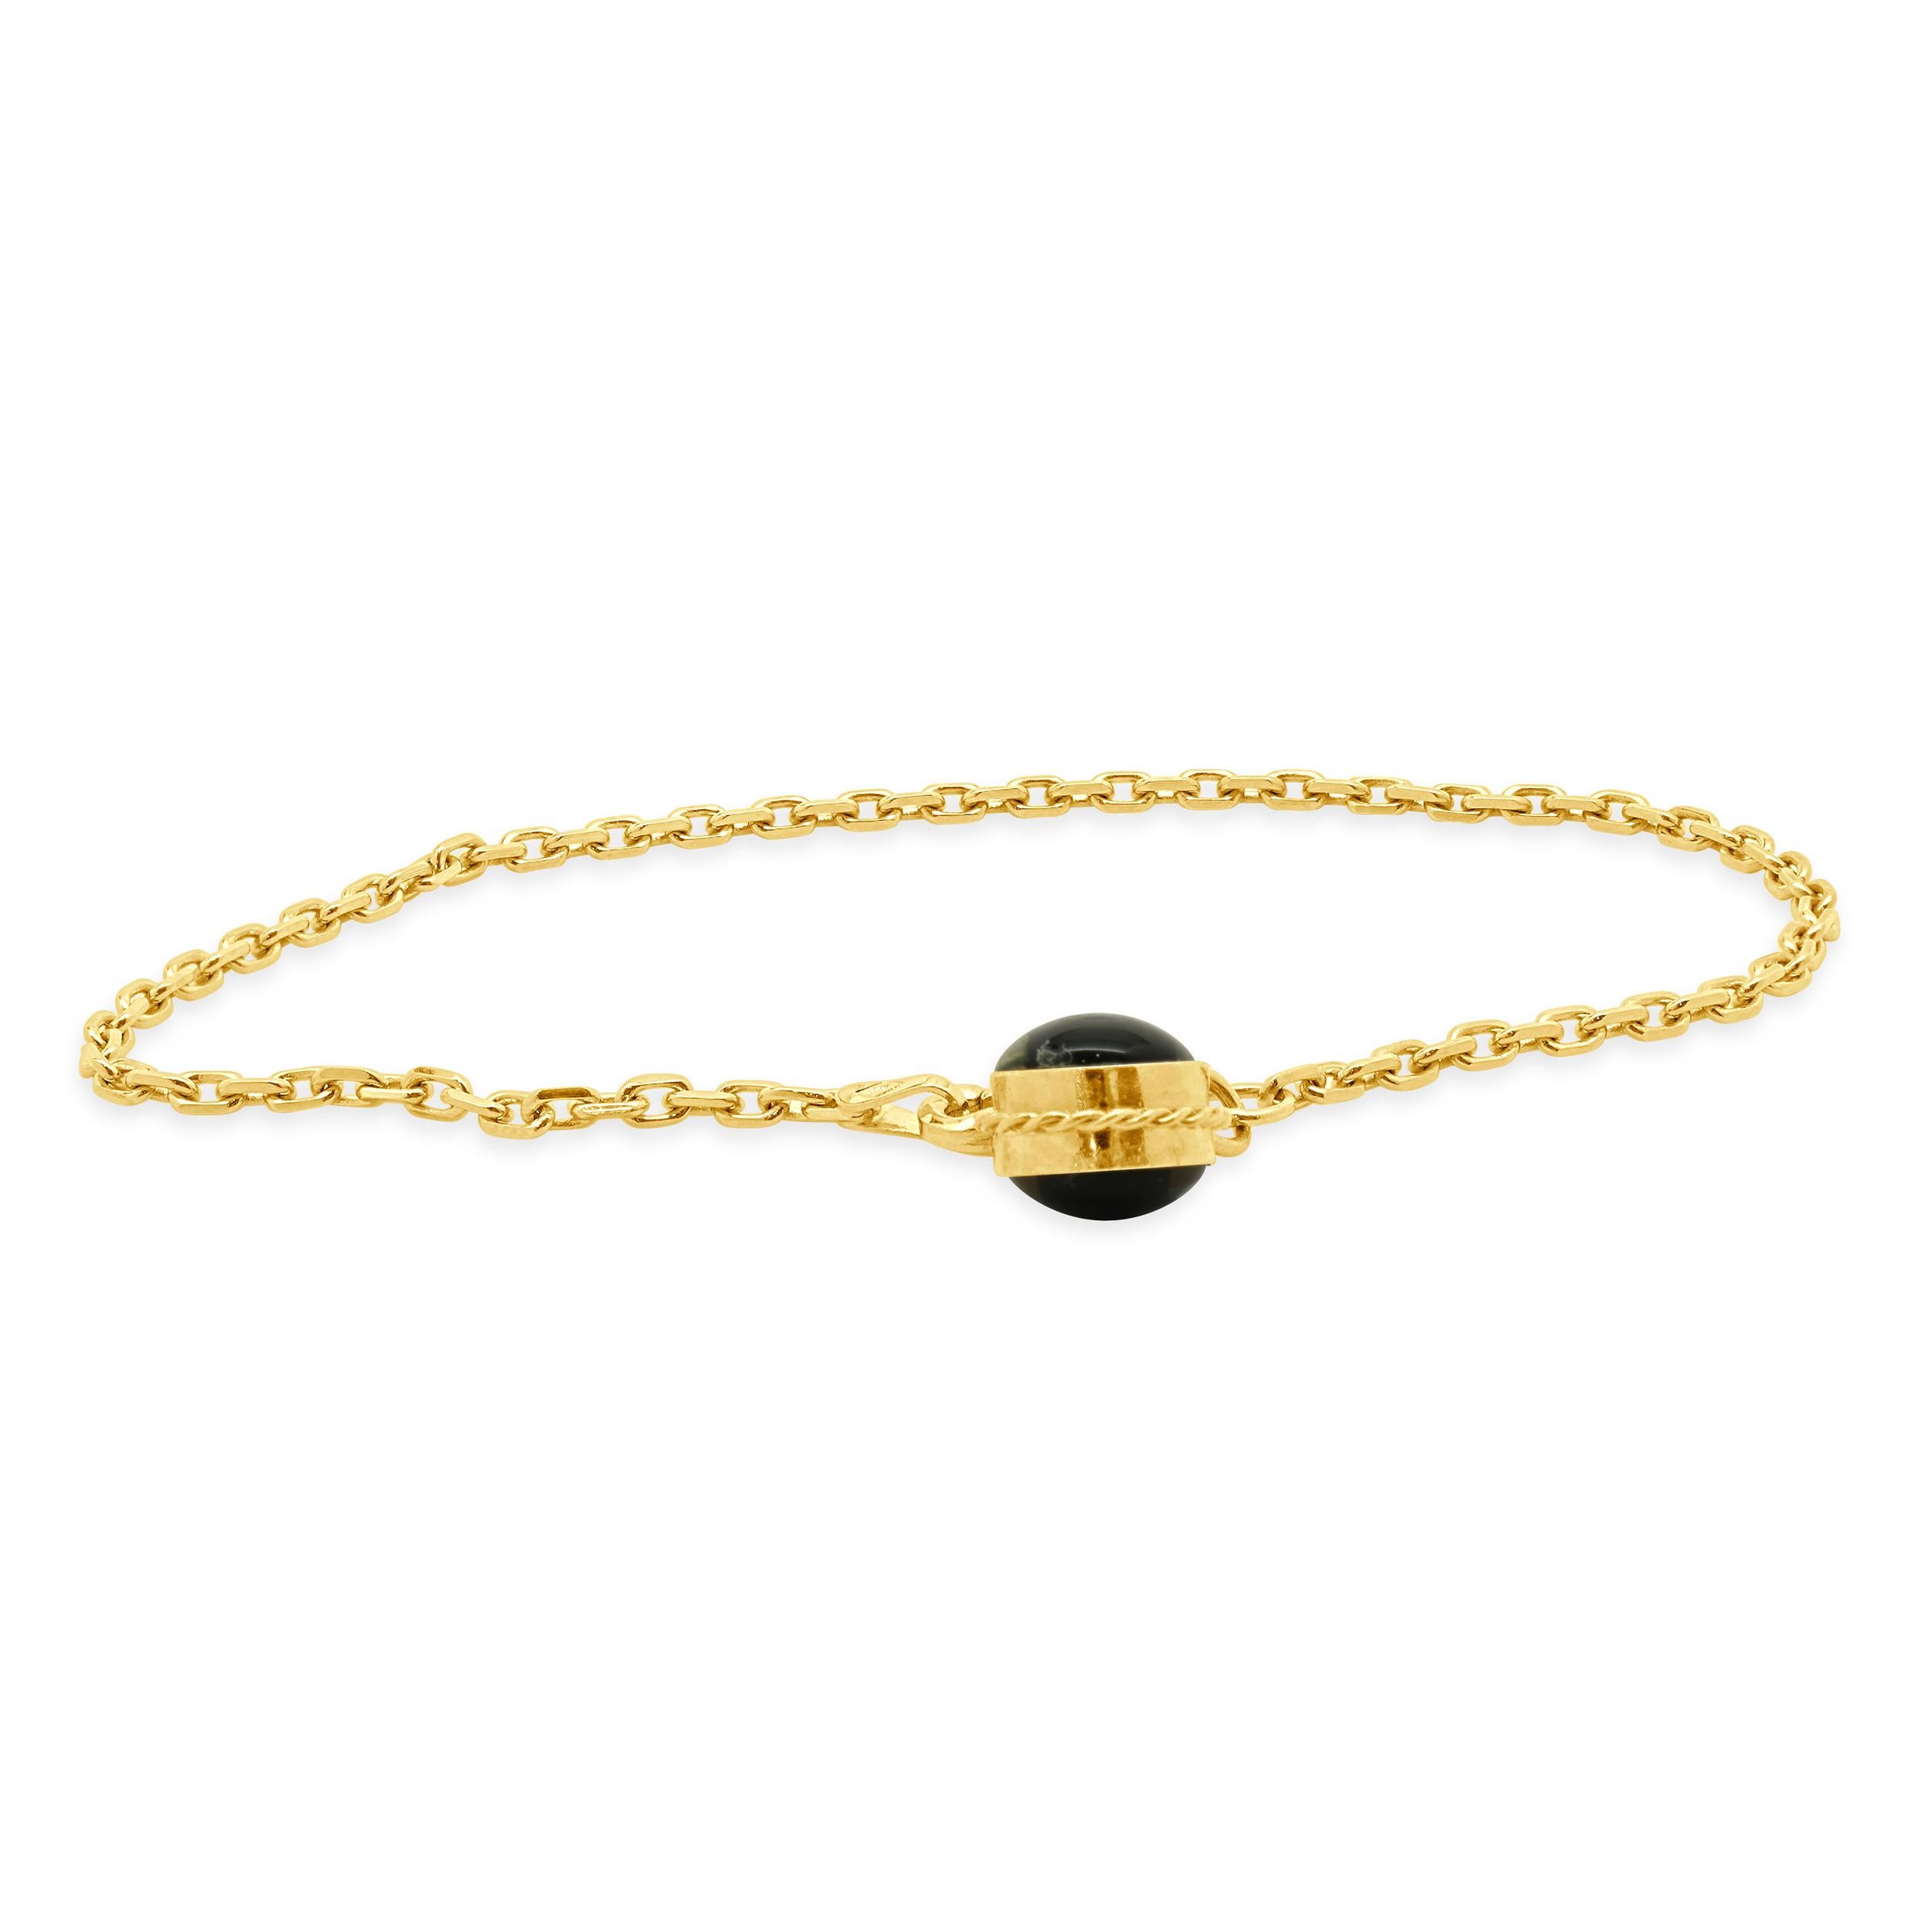 Designer: custom
Material: 14K yellow gold
Weight: 4.30 grams
Dimensions: bracelet will fit up to a 7.25-inch wrist
